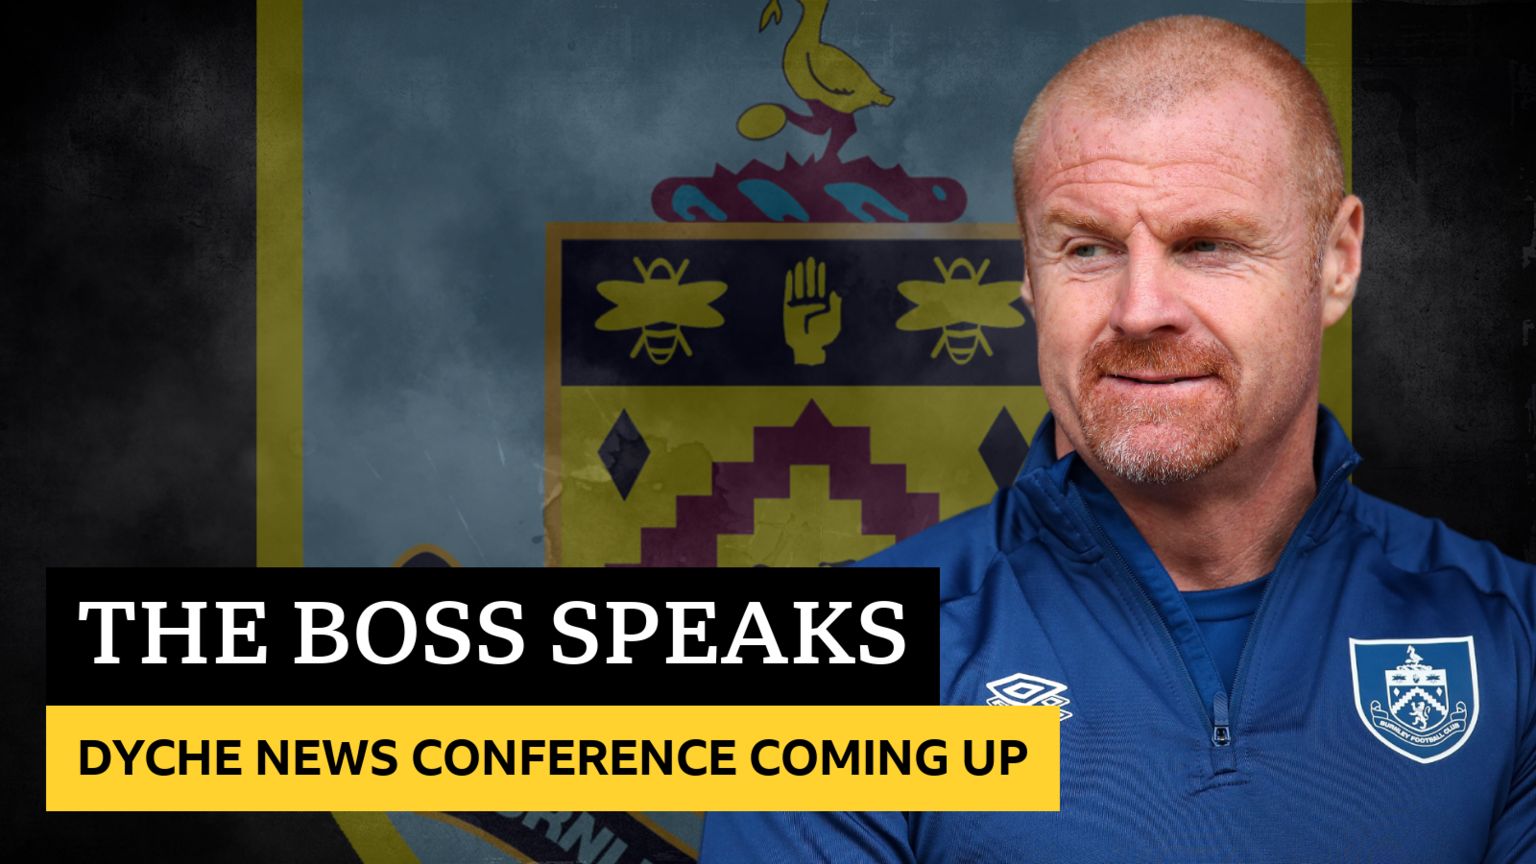 Sean Dyche press conference coming up